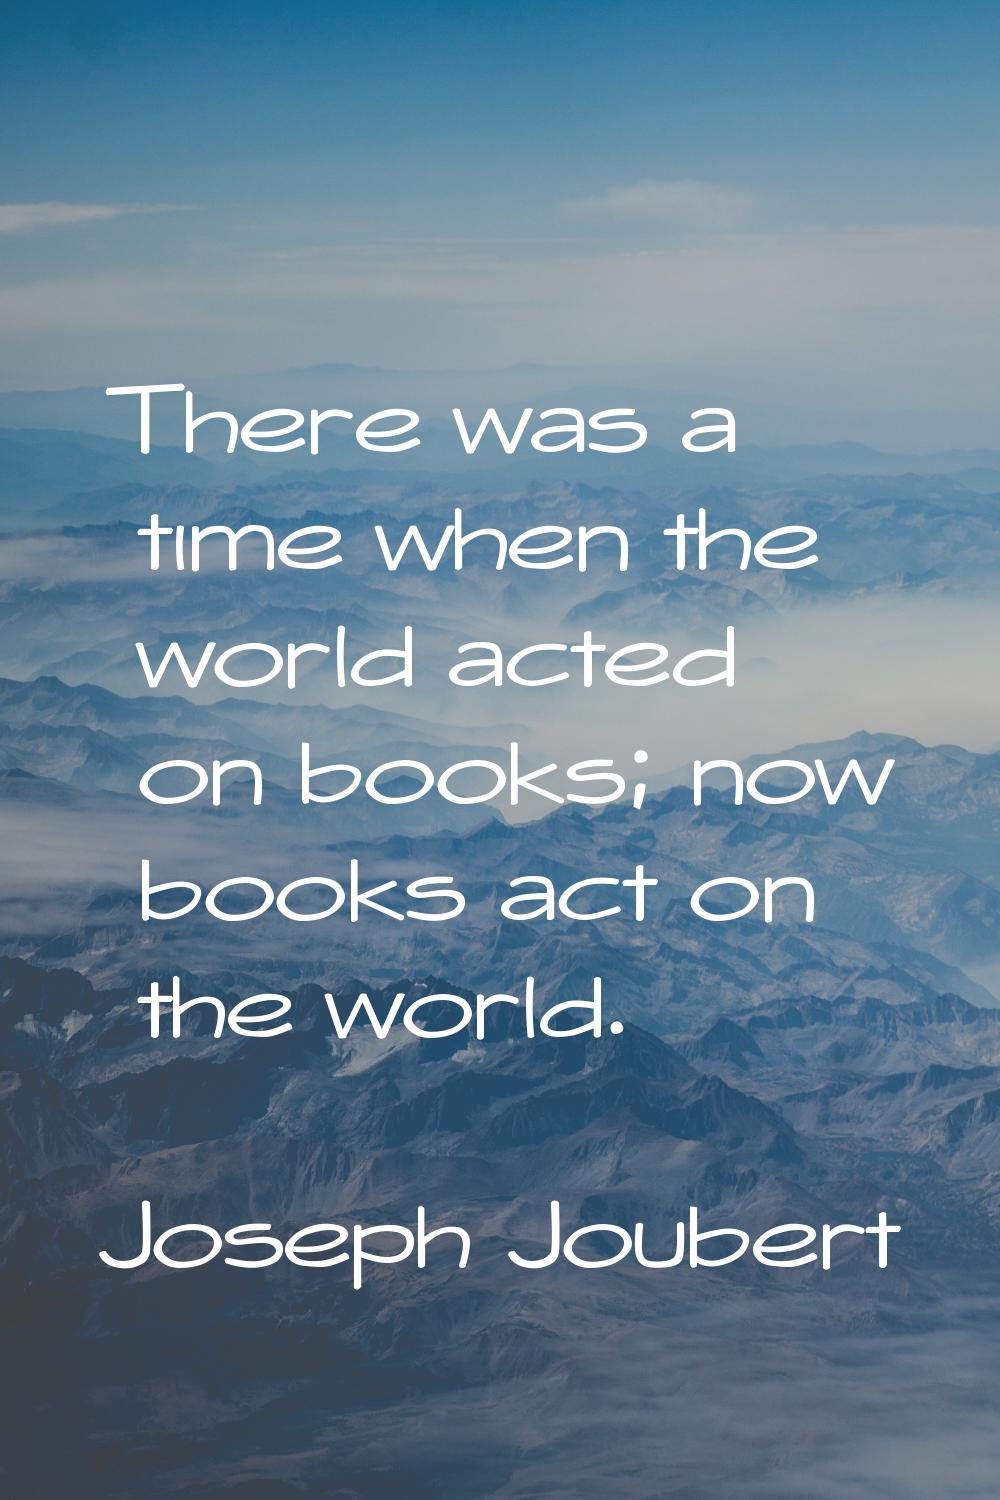 There was a time when the world acted on books; now books act on the world.